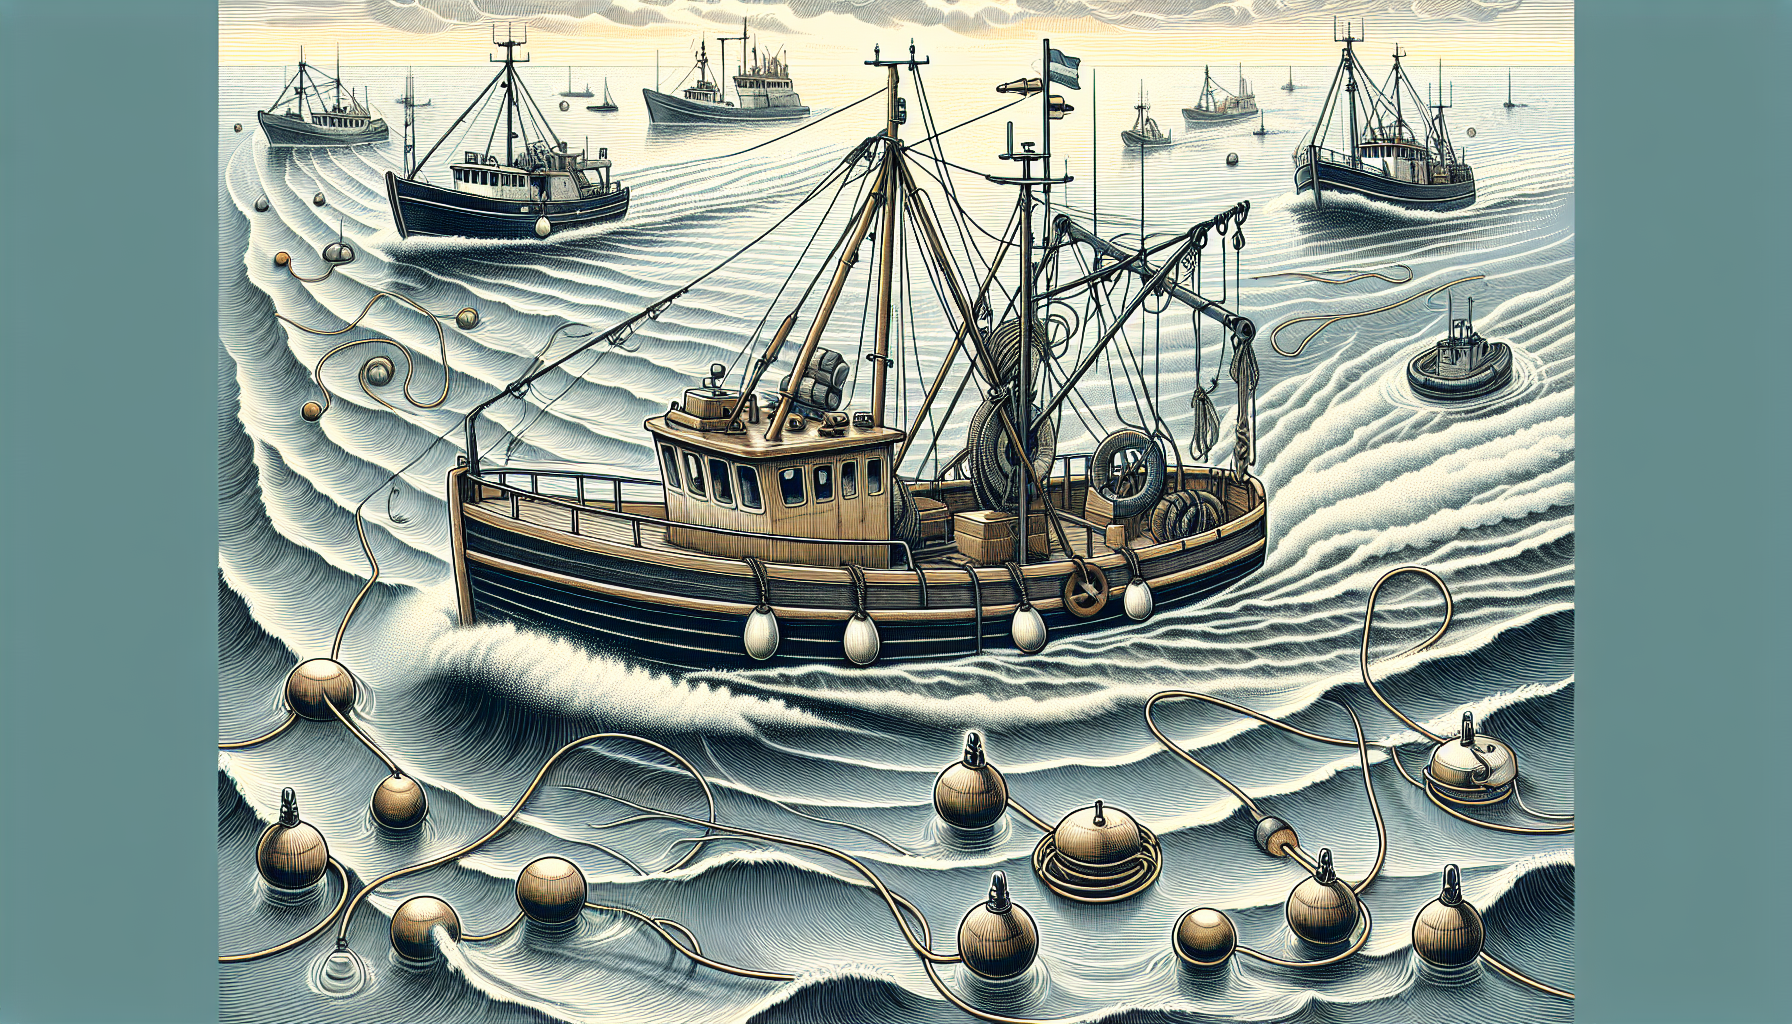 Illustration of a fishing boat on the water